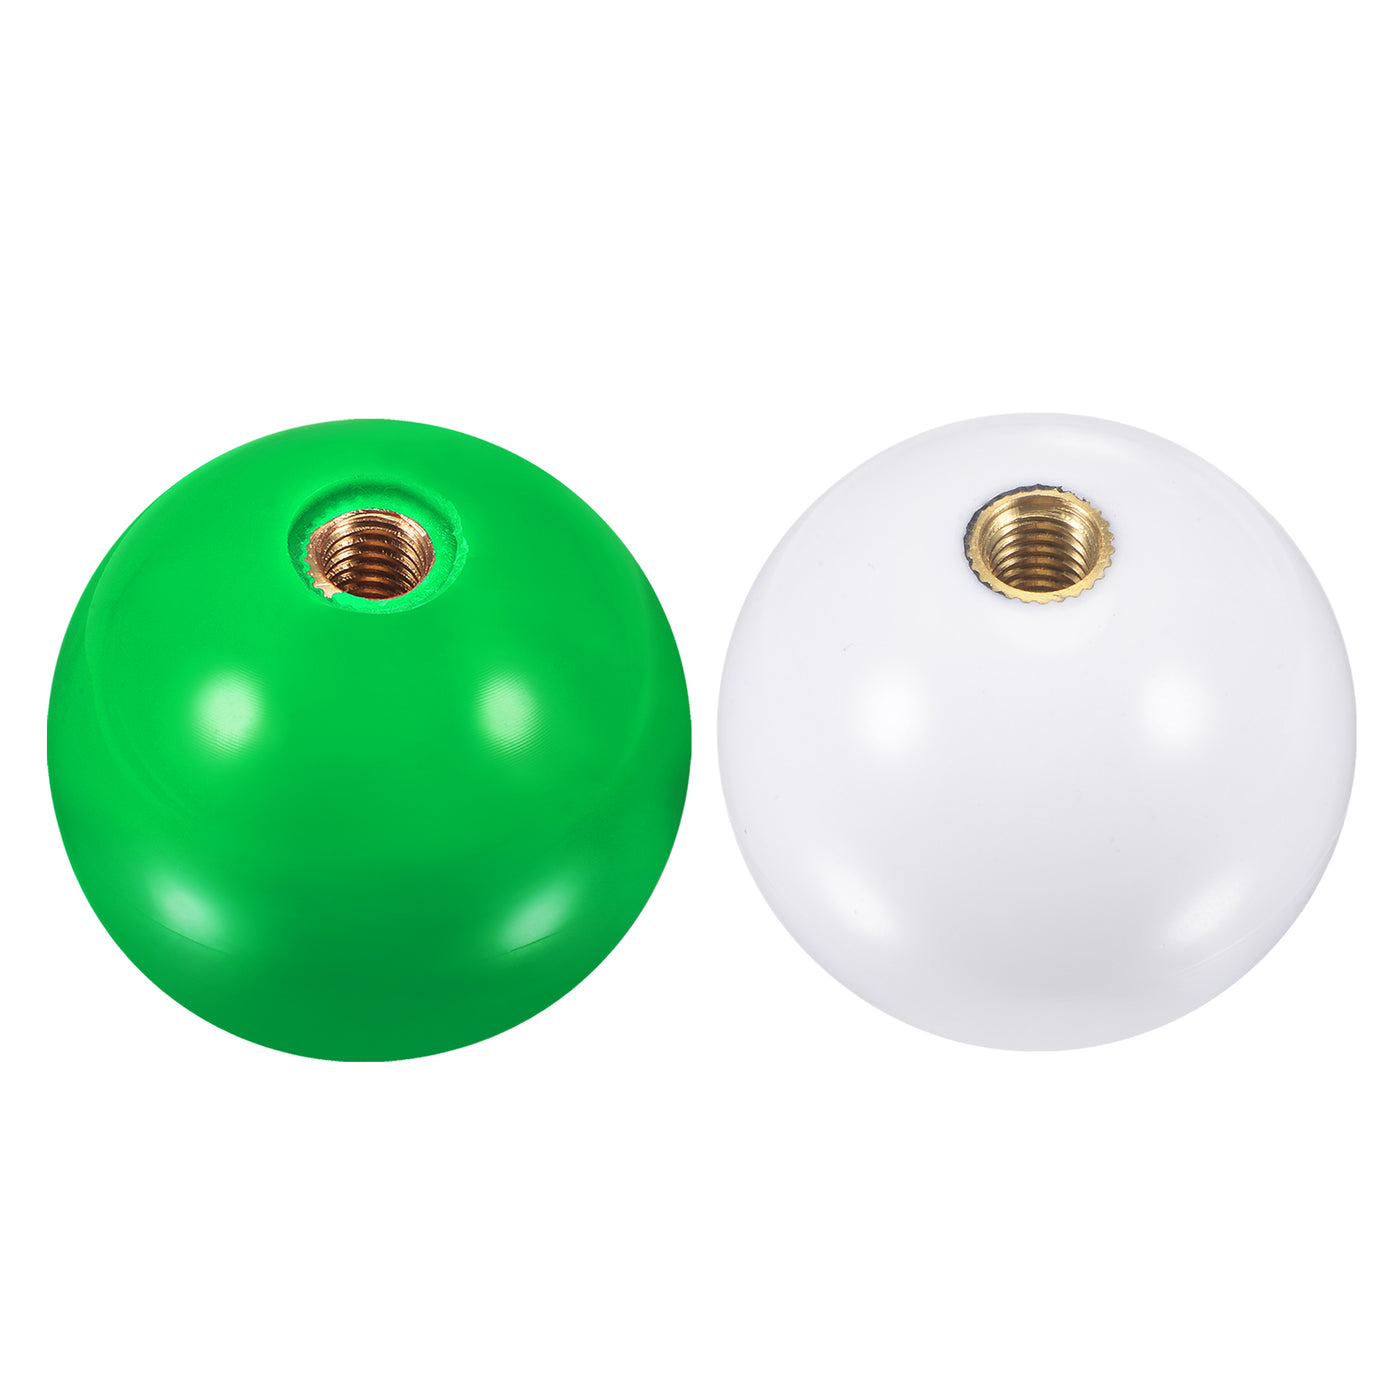 uxcell Uxcell Joystick Head Rocker Ball Top Handle Arcade Game Replacement Green/White